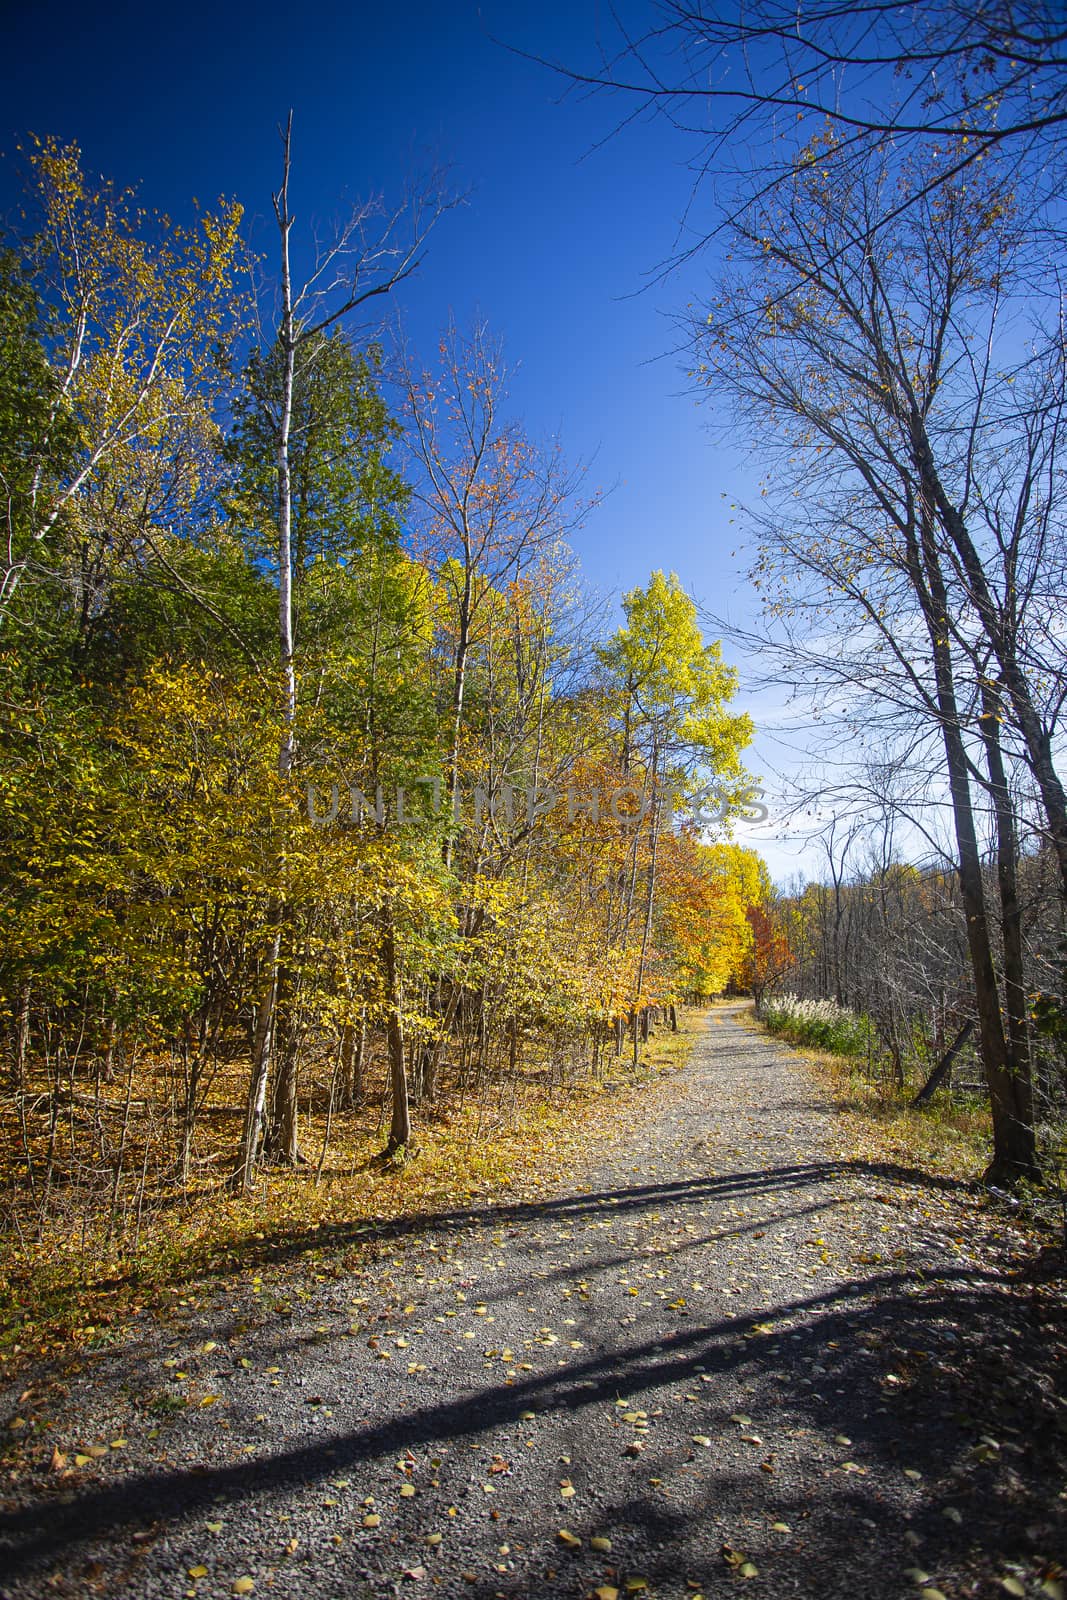 Gravel park path, surrounded by trees, with blue sky during the fall